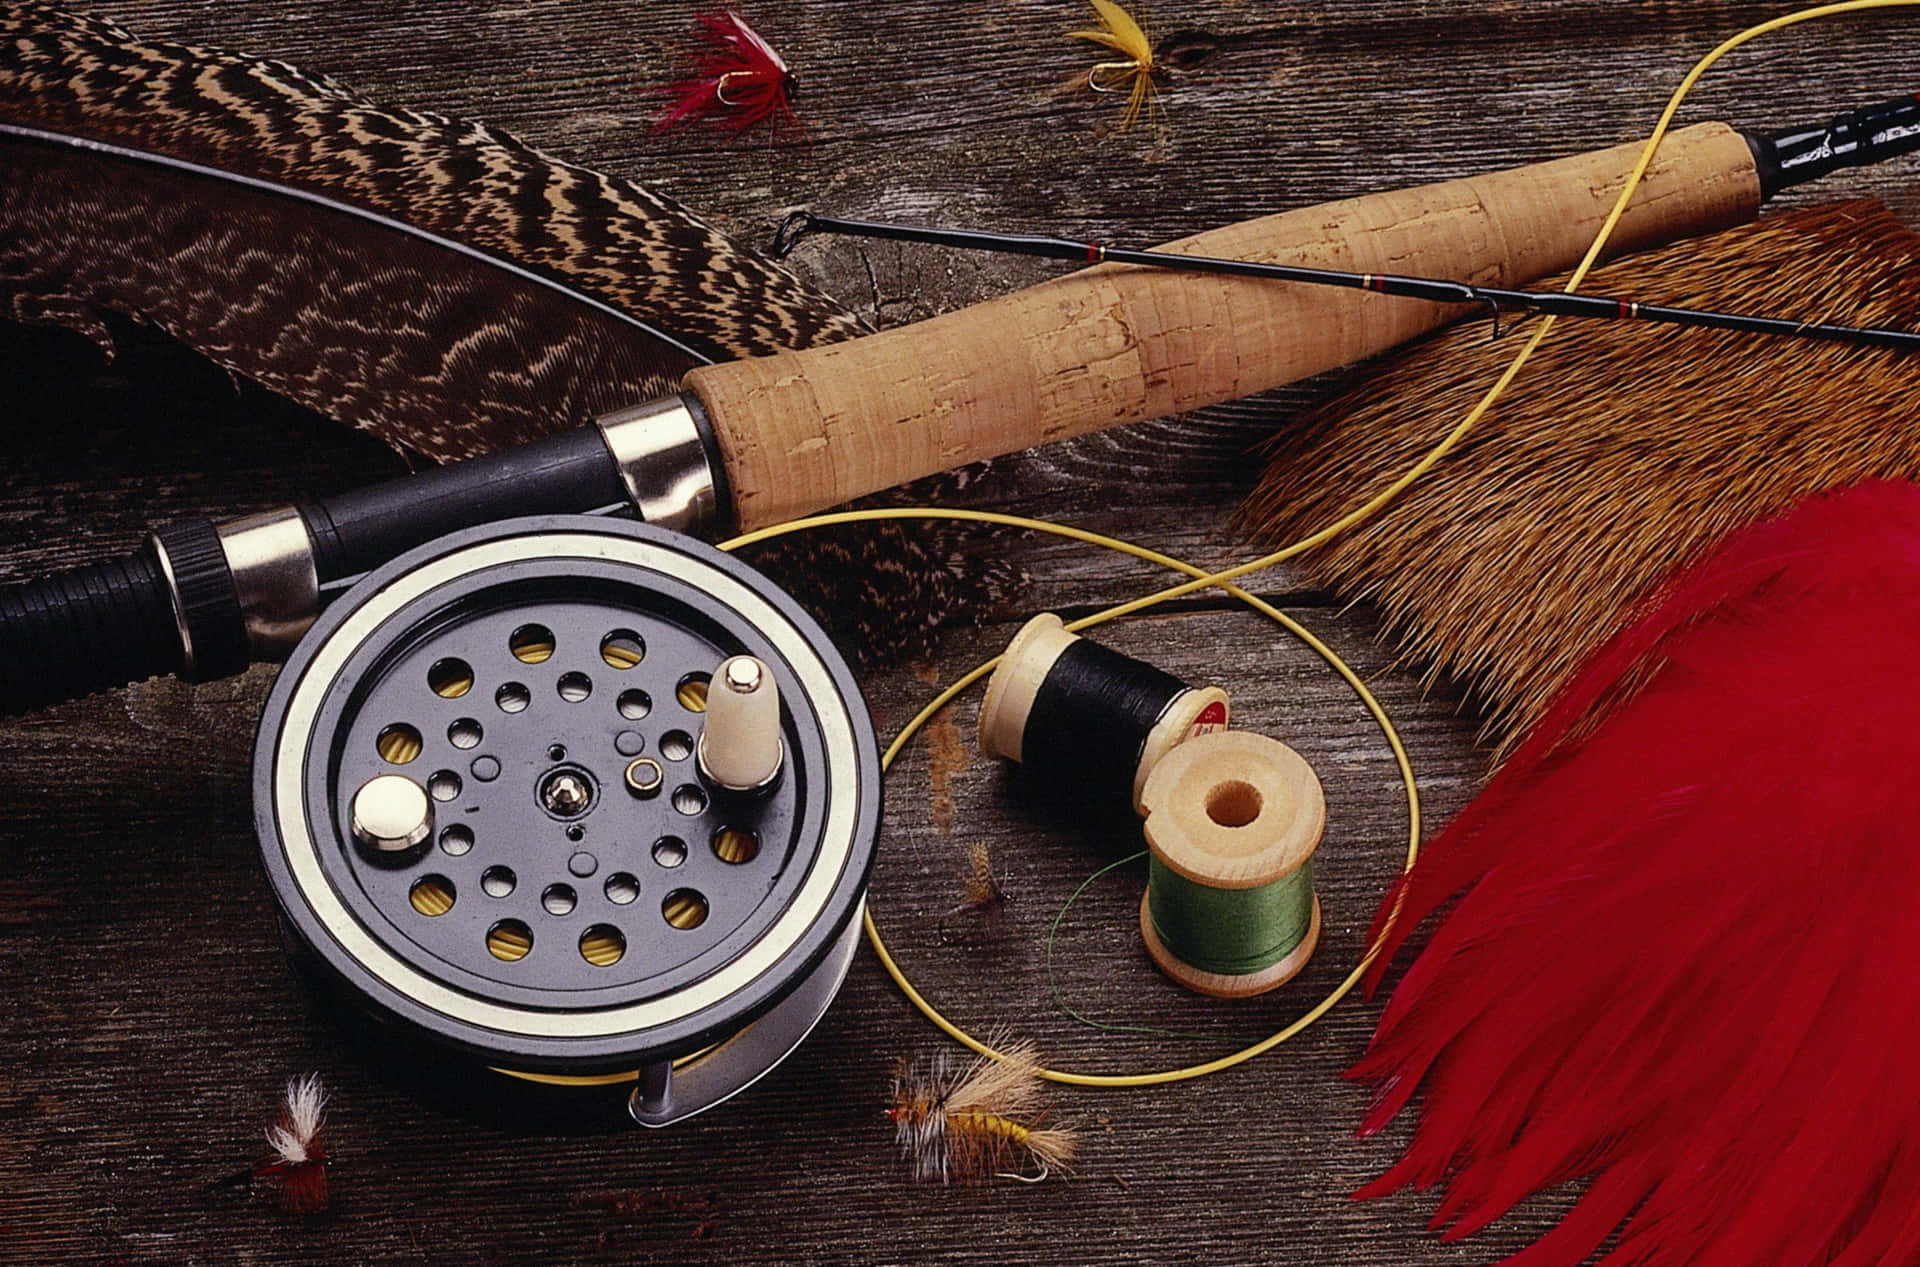 100+] Fly Fishing Wallpapers